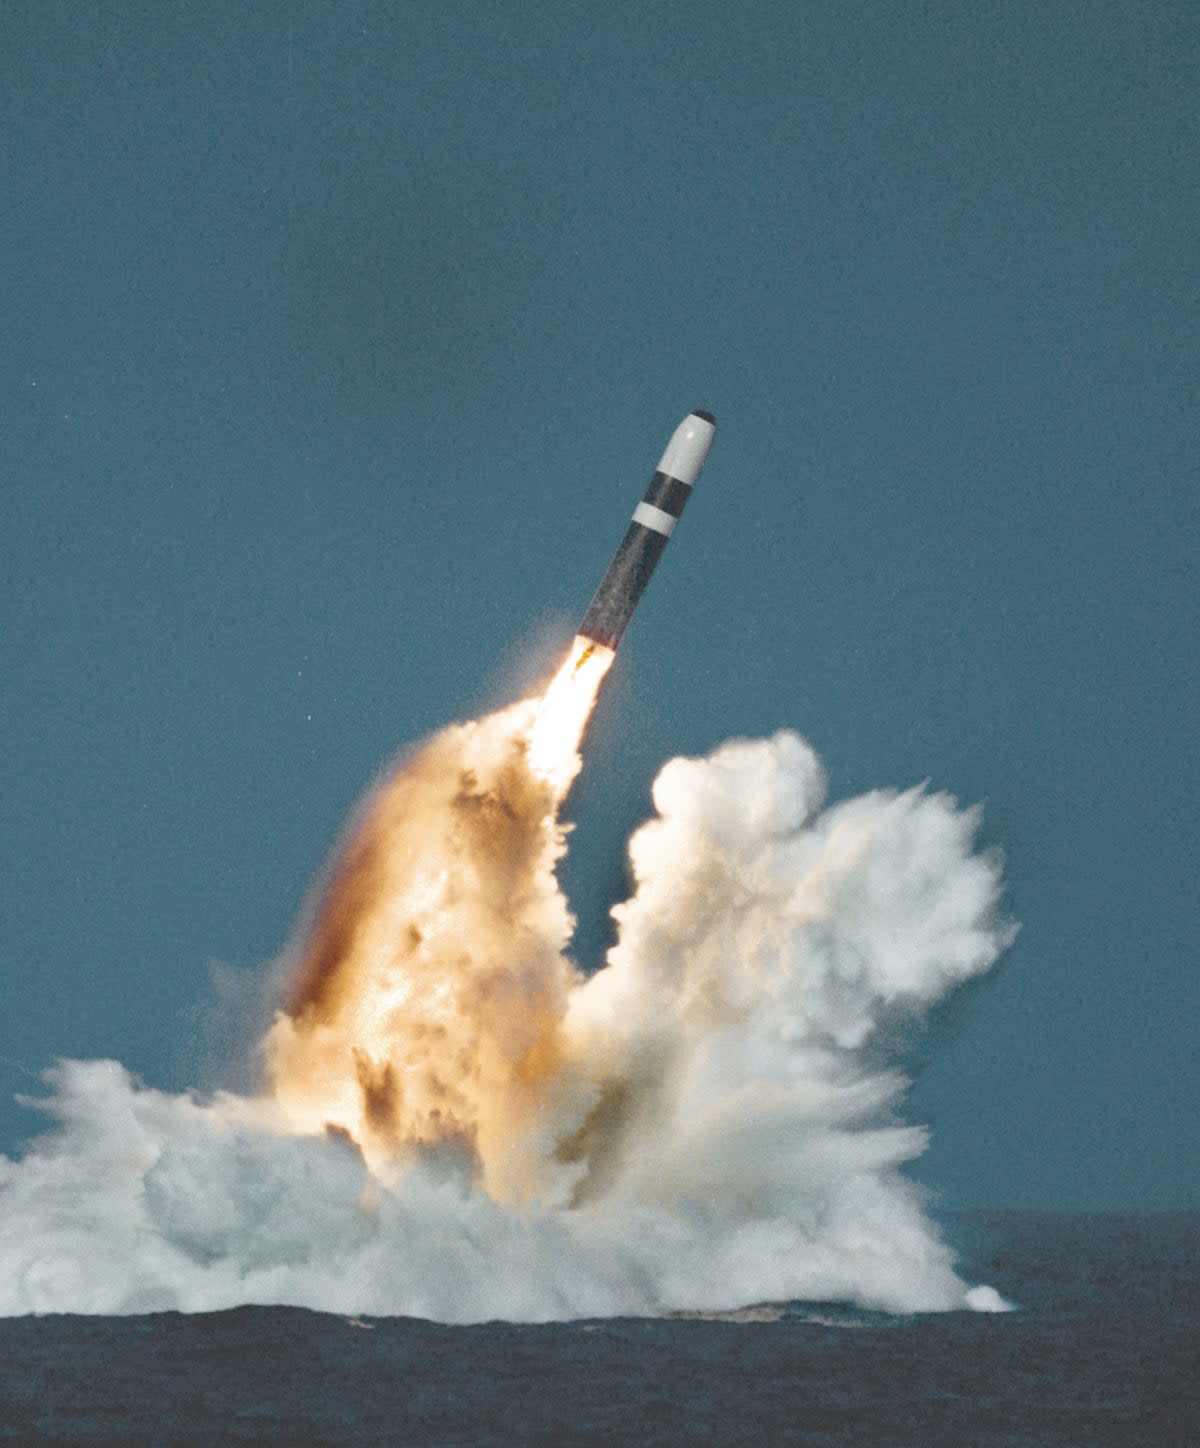 Test launch of a Trident II missile from a sub (US Department of Defense)